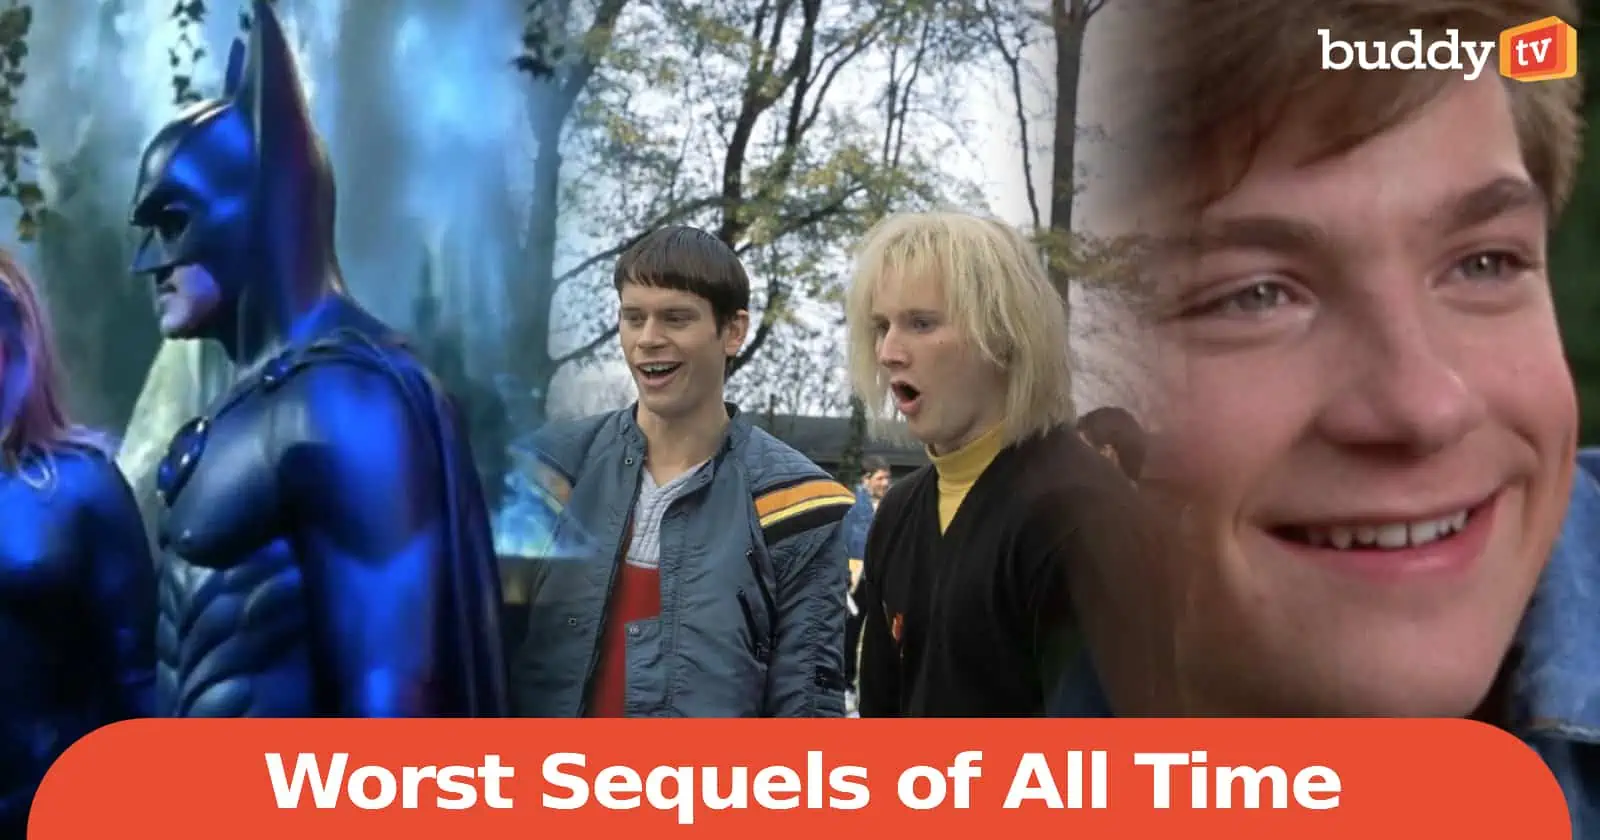 10 Worst Sequels of All Time, Ranked by Viewers